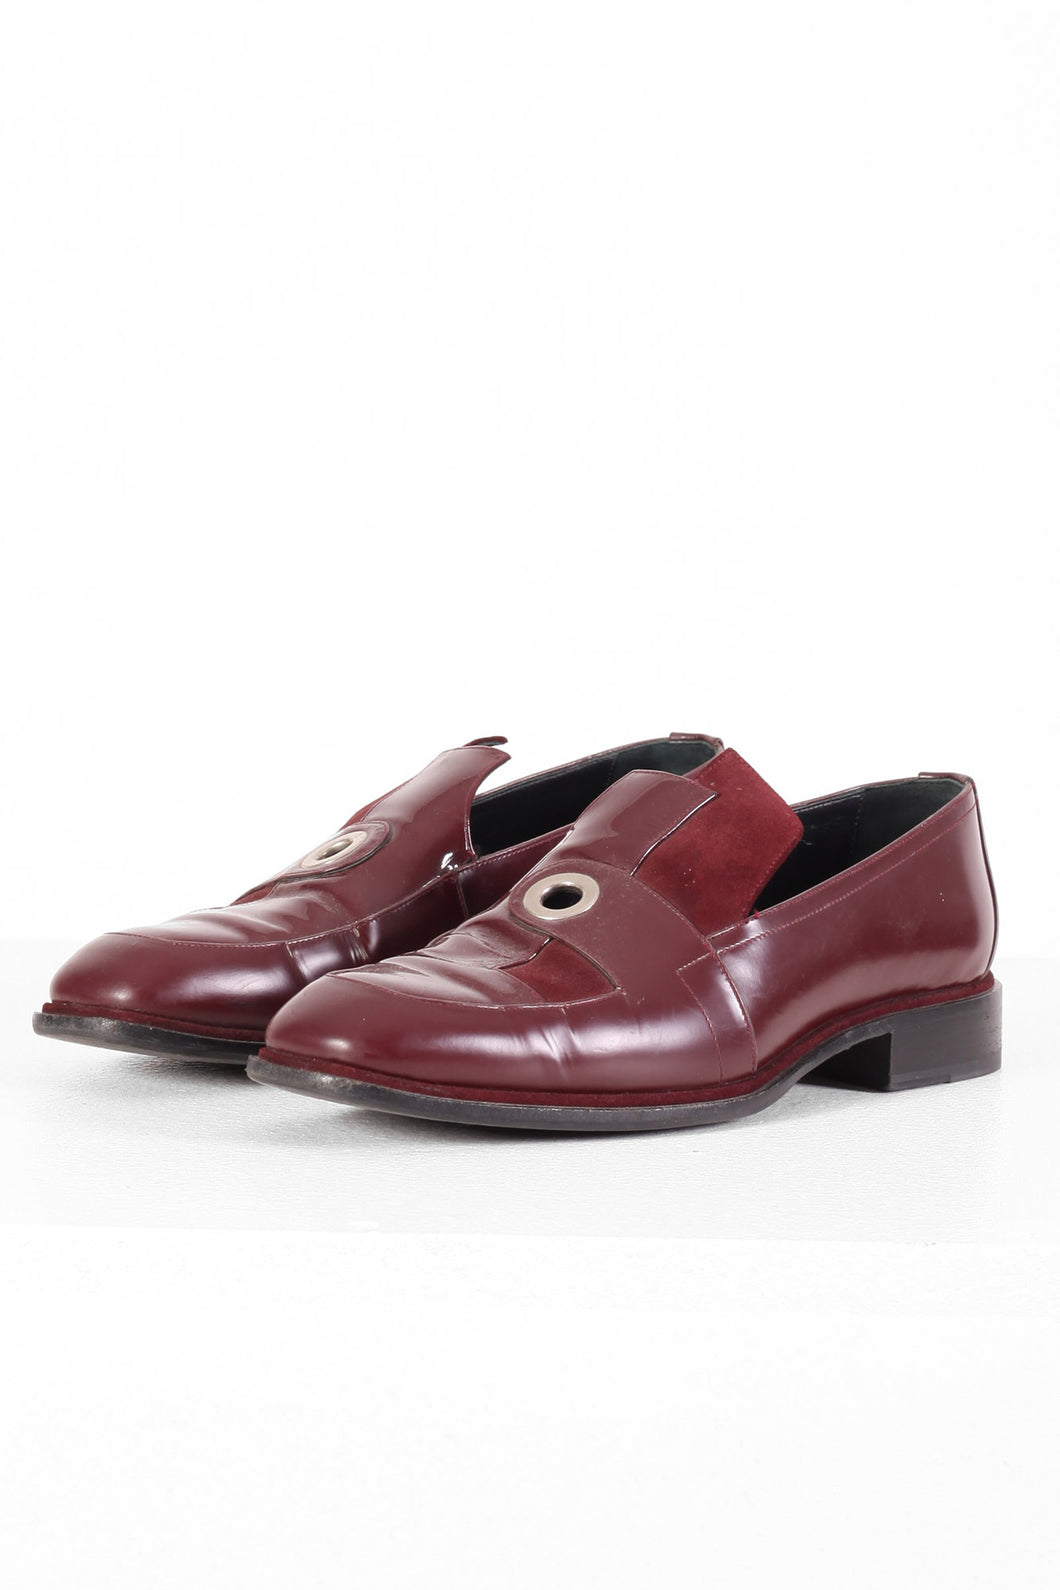 J.W. Anderson Patent Leather Loafer